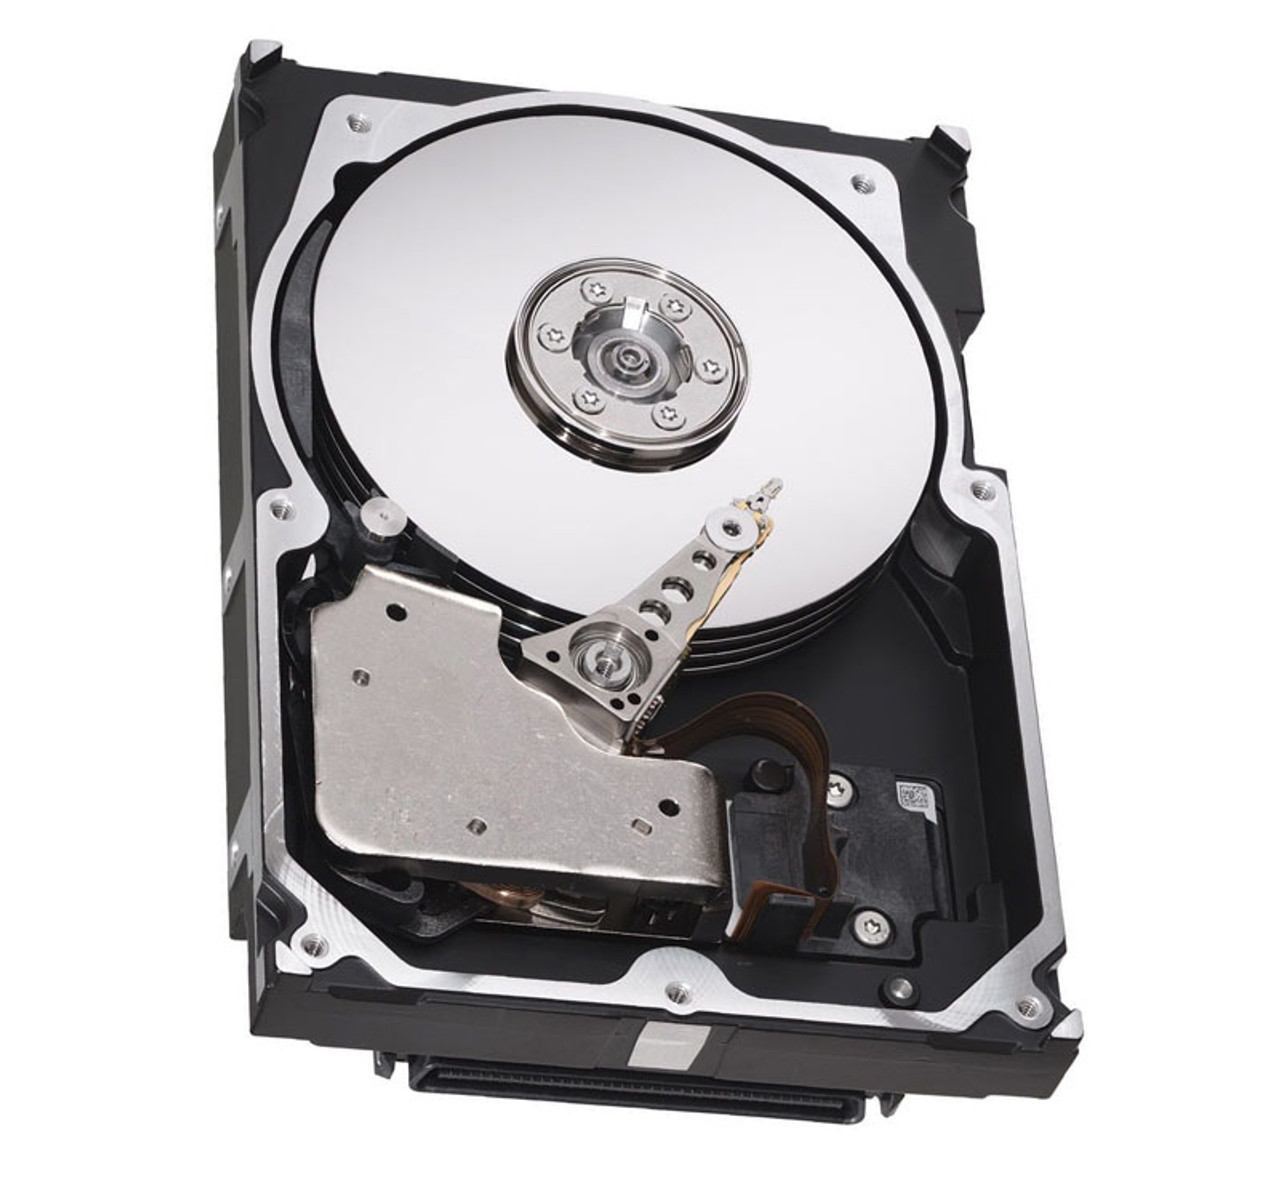 A3318-69004 - HP 2GB 7200RPM Fast Wide SCSI non Hot-Plug Single-Ended 68-Pin 3.5-inch Hard Drive